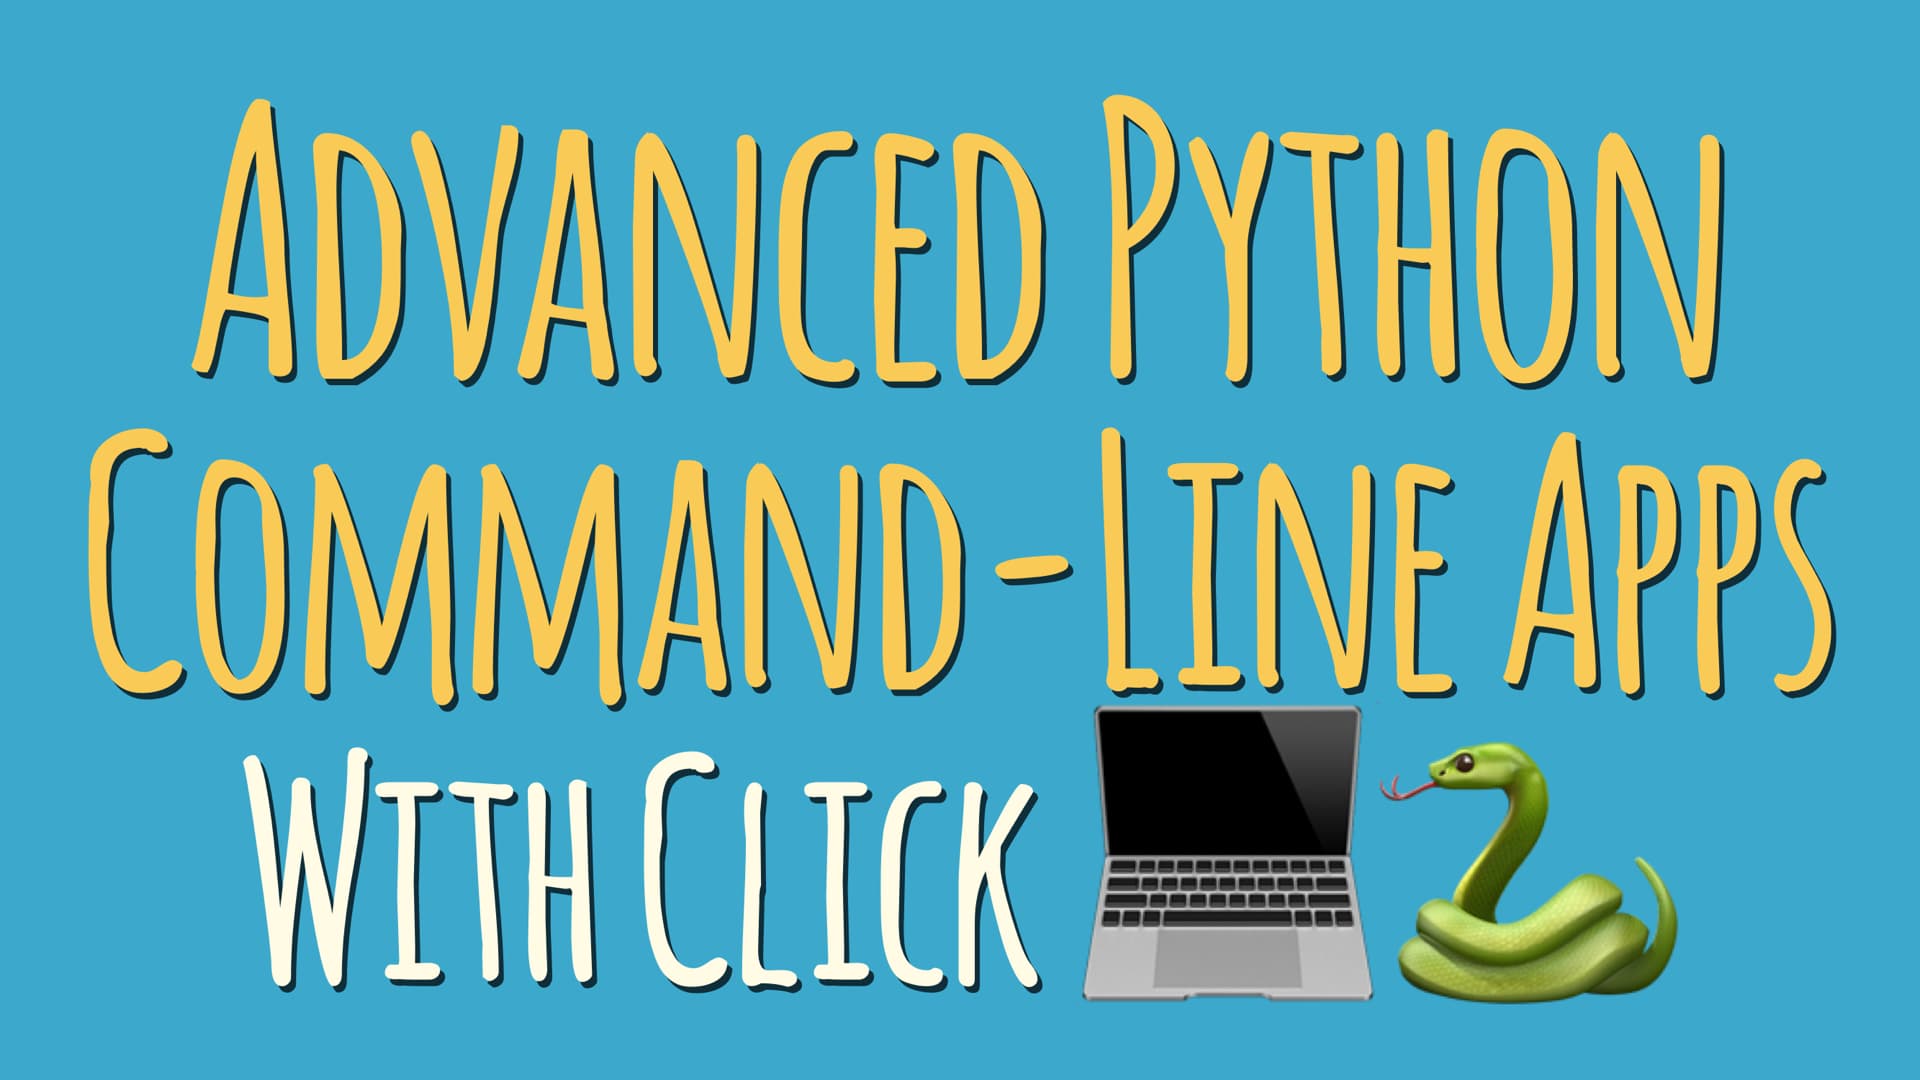 Making advanced Python CLIs with Click